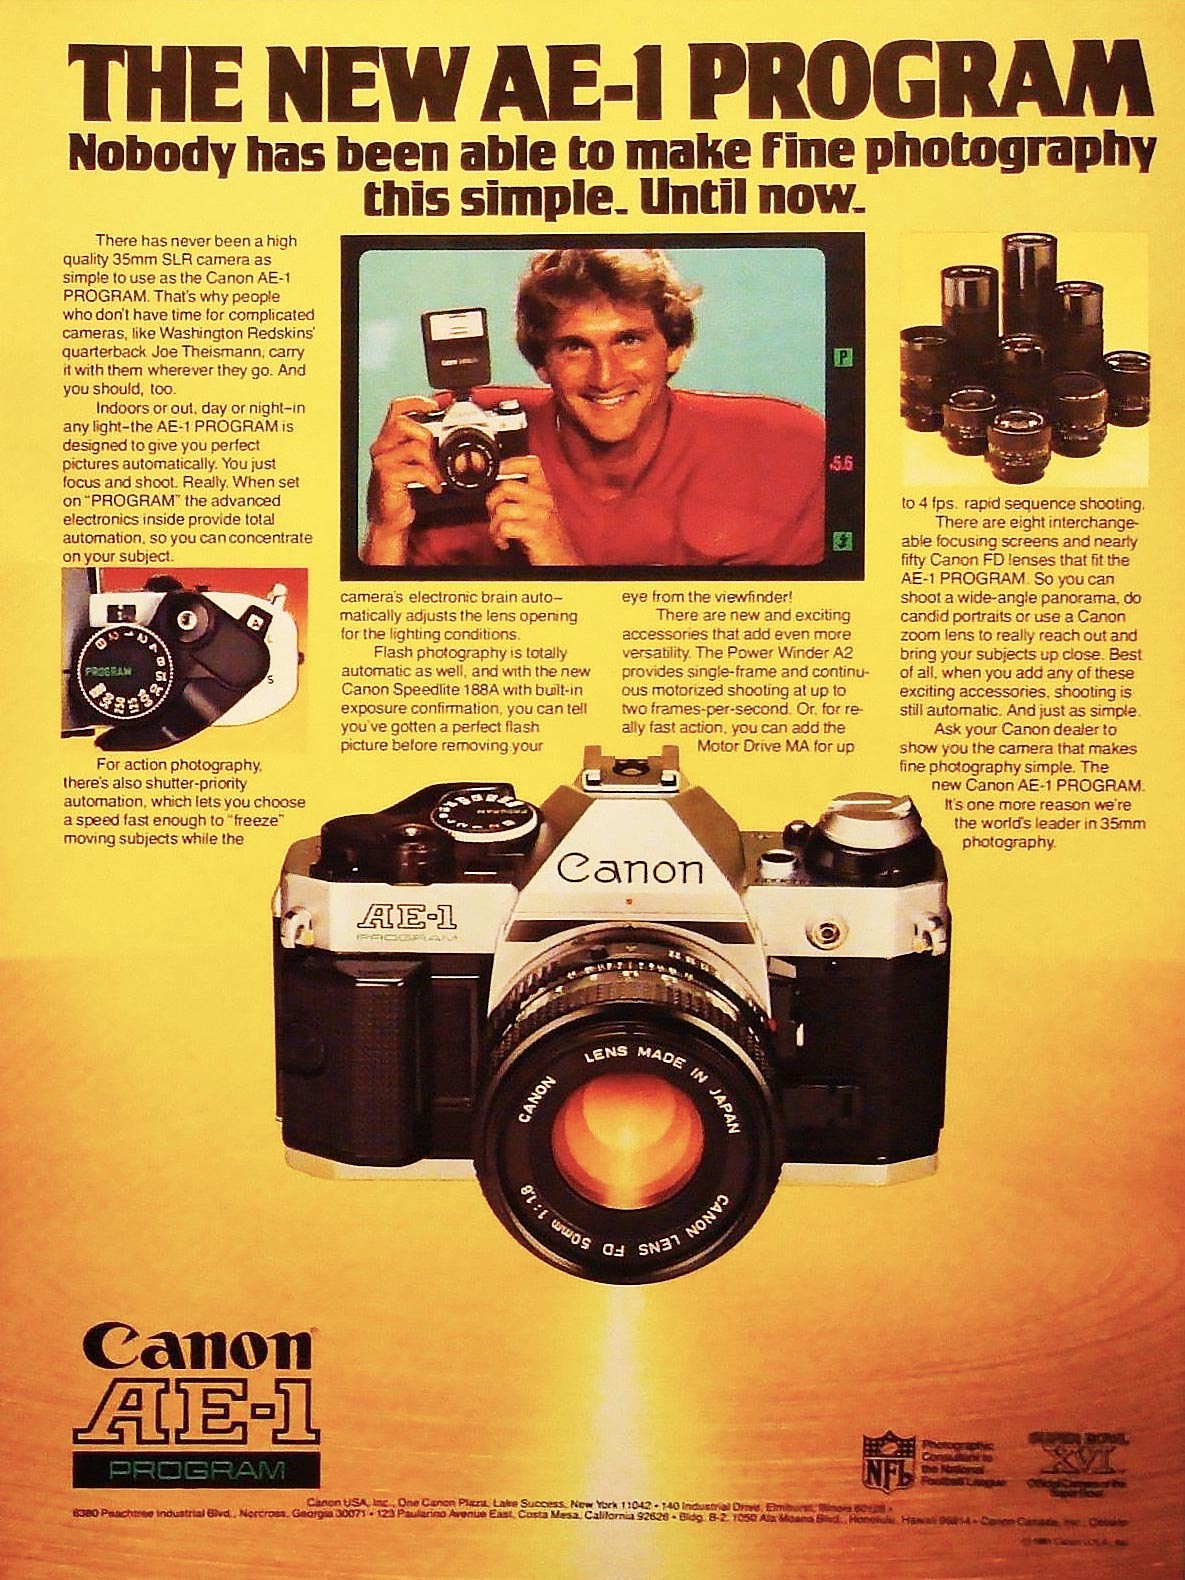 Advertisement for the Canon AE-1 Program